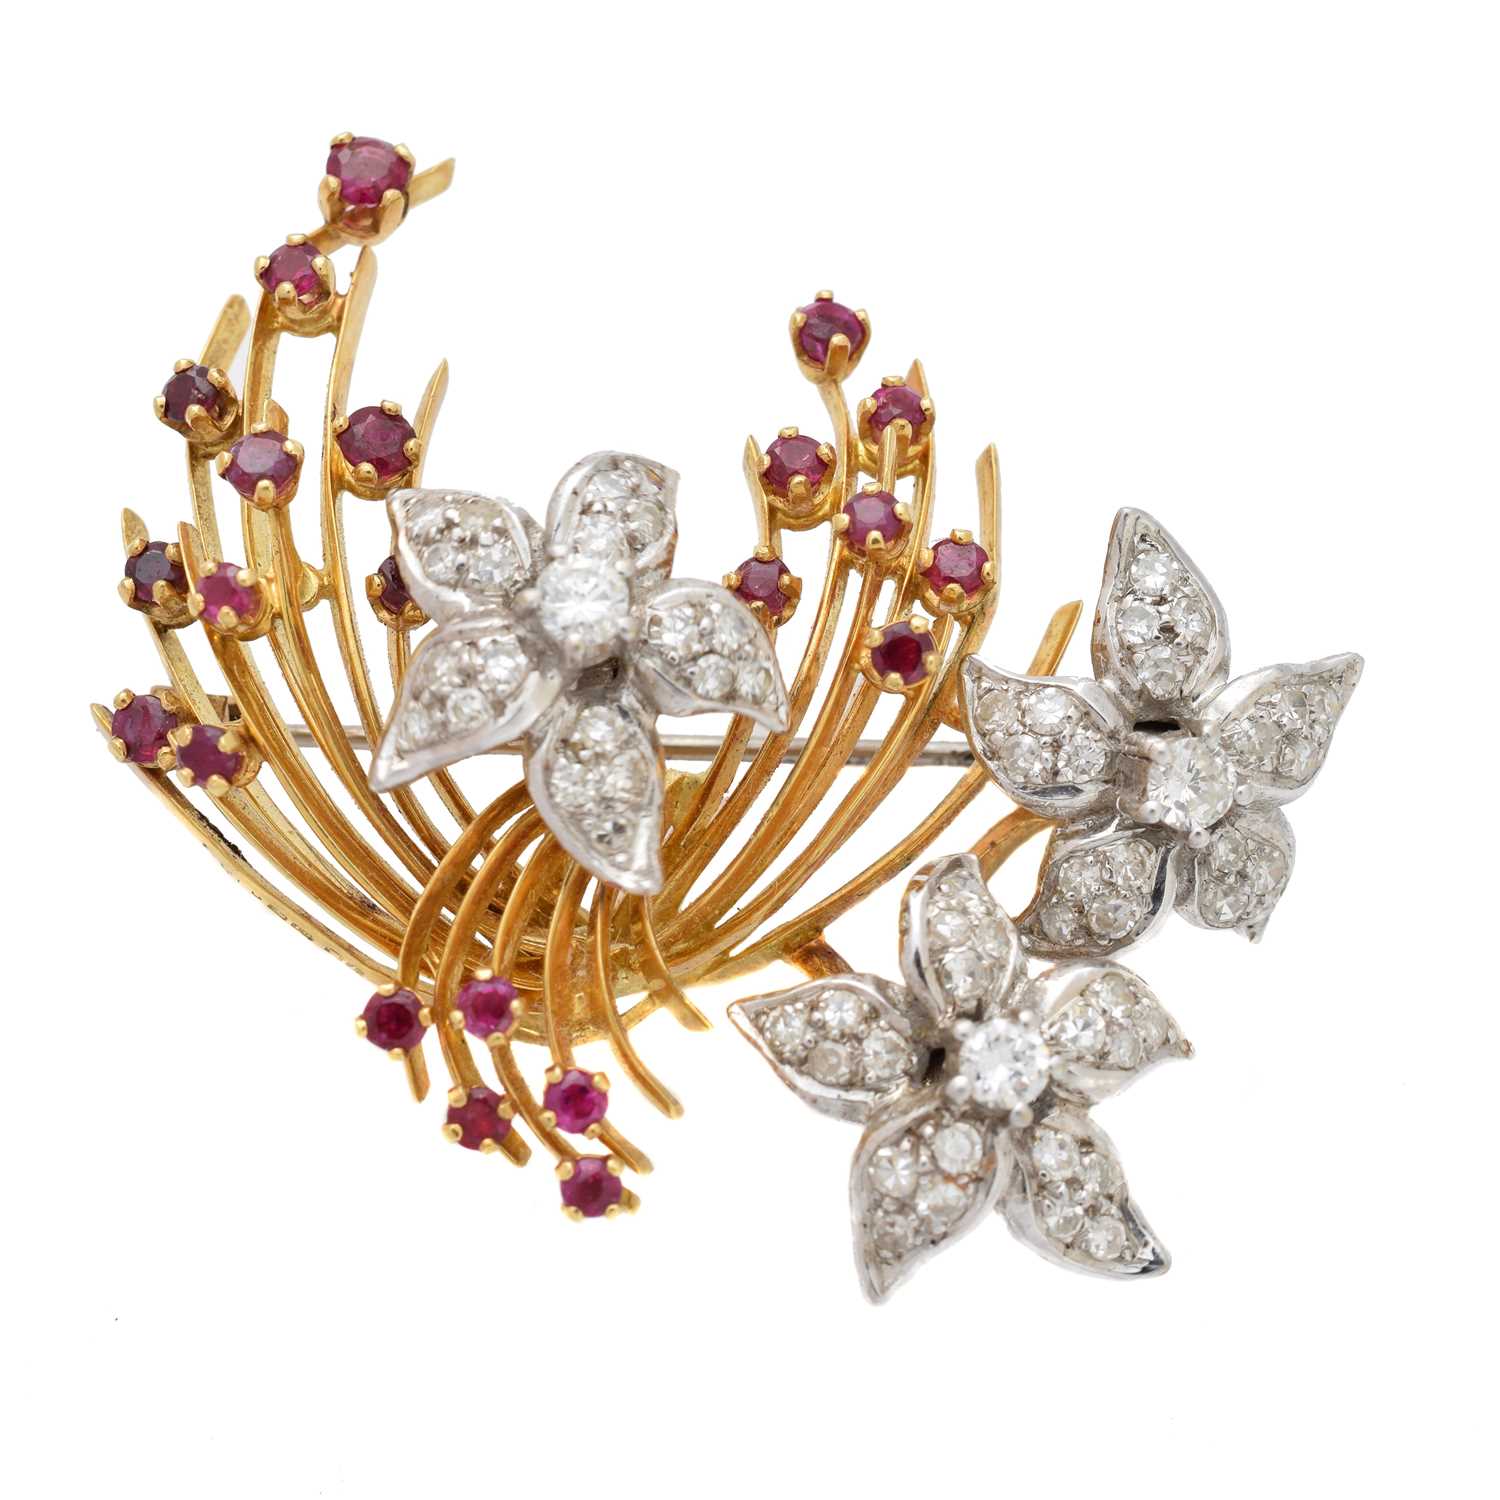 Lot 59 - A 1960s 18ct gold diamond and ruby brooch by